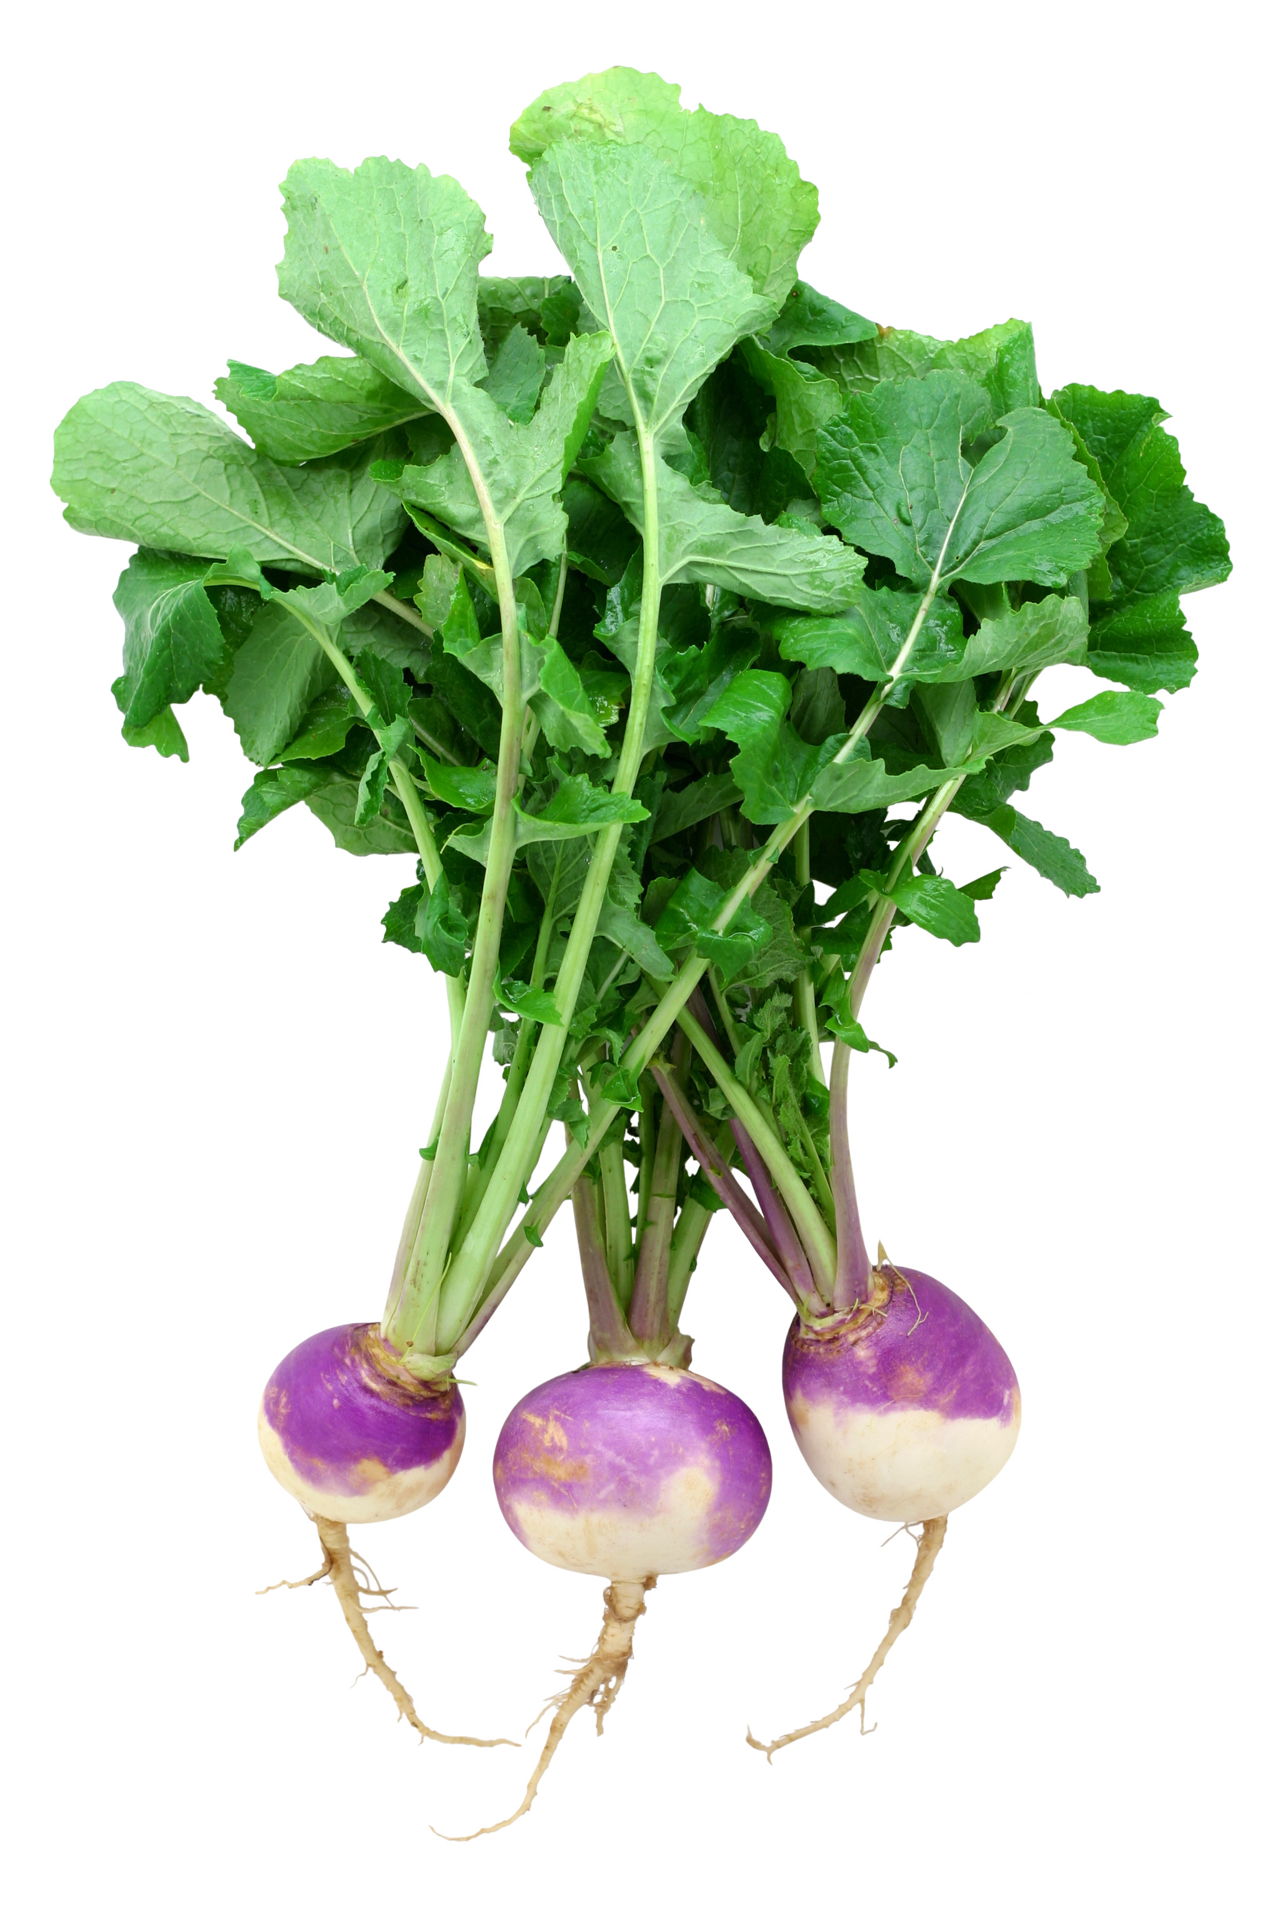 Nutritional Value of Turnip Greens